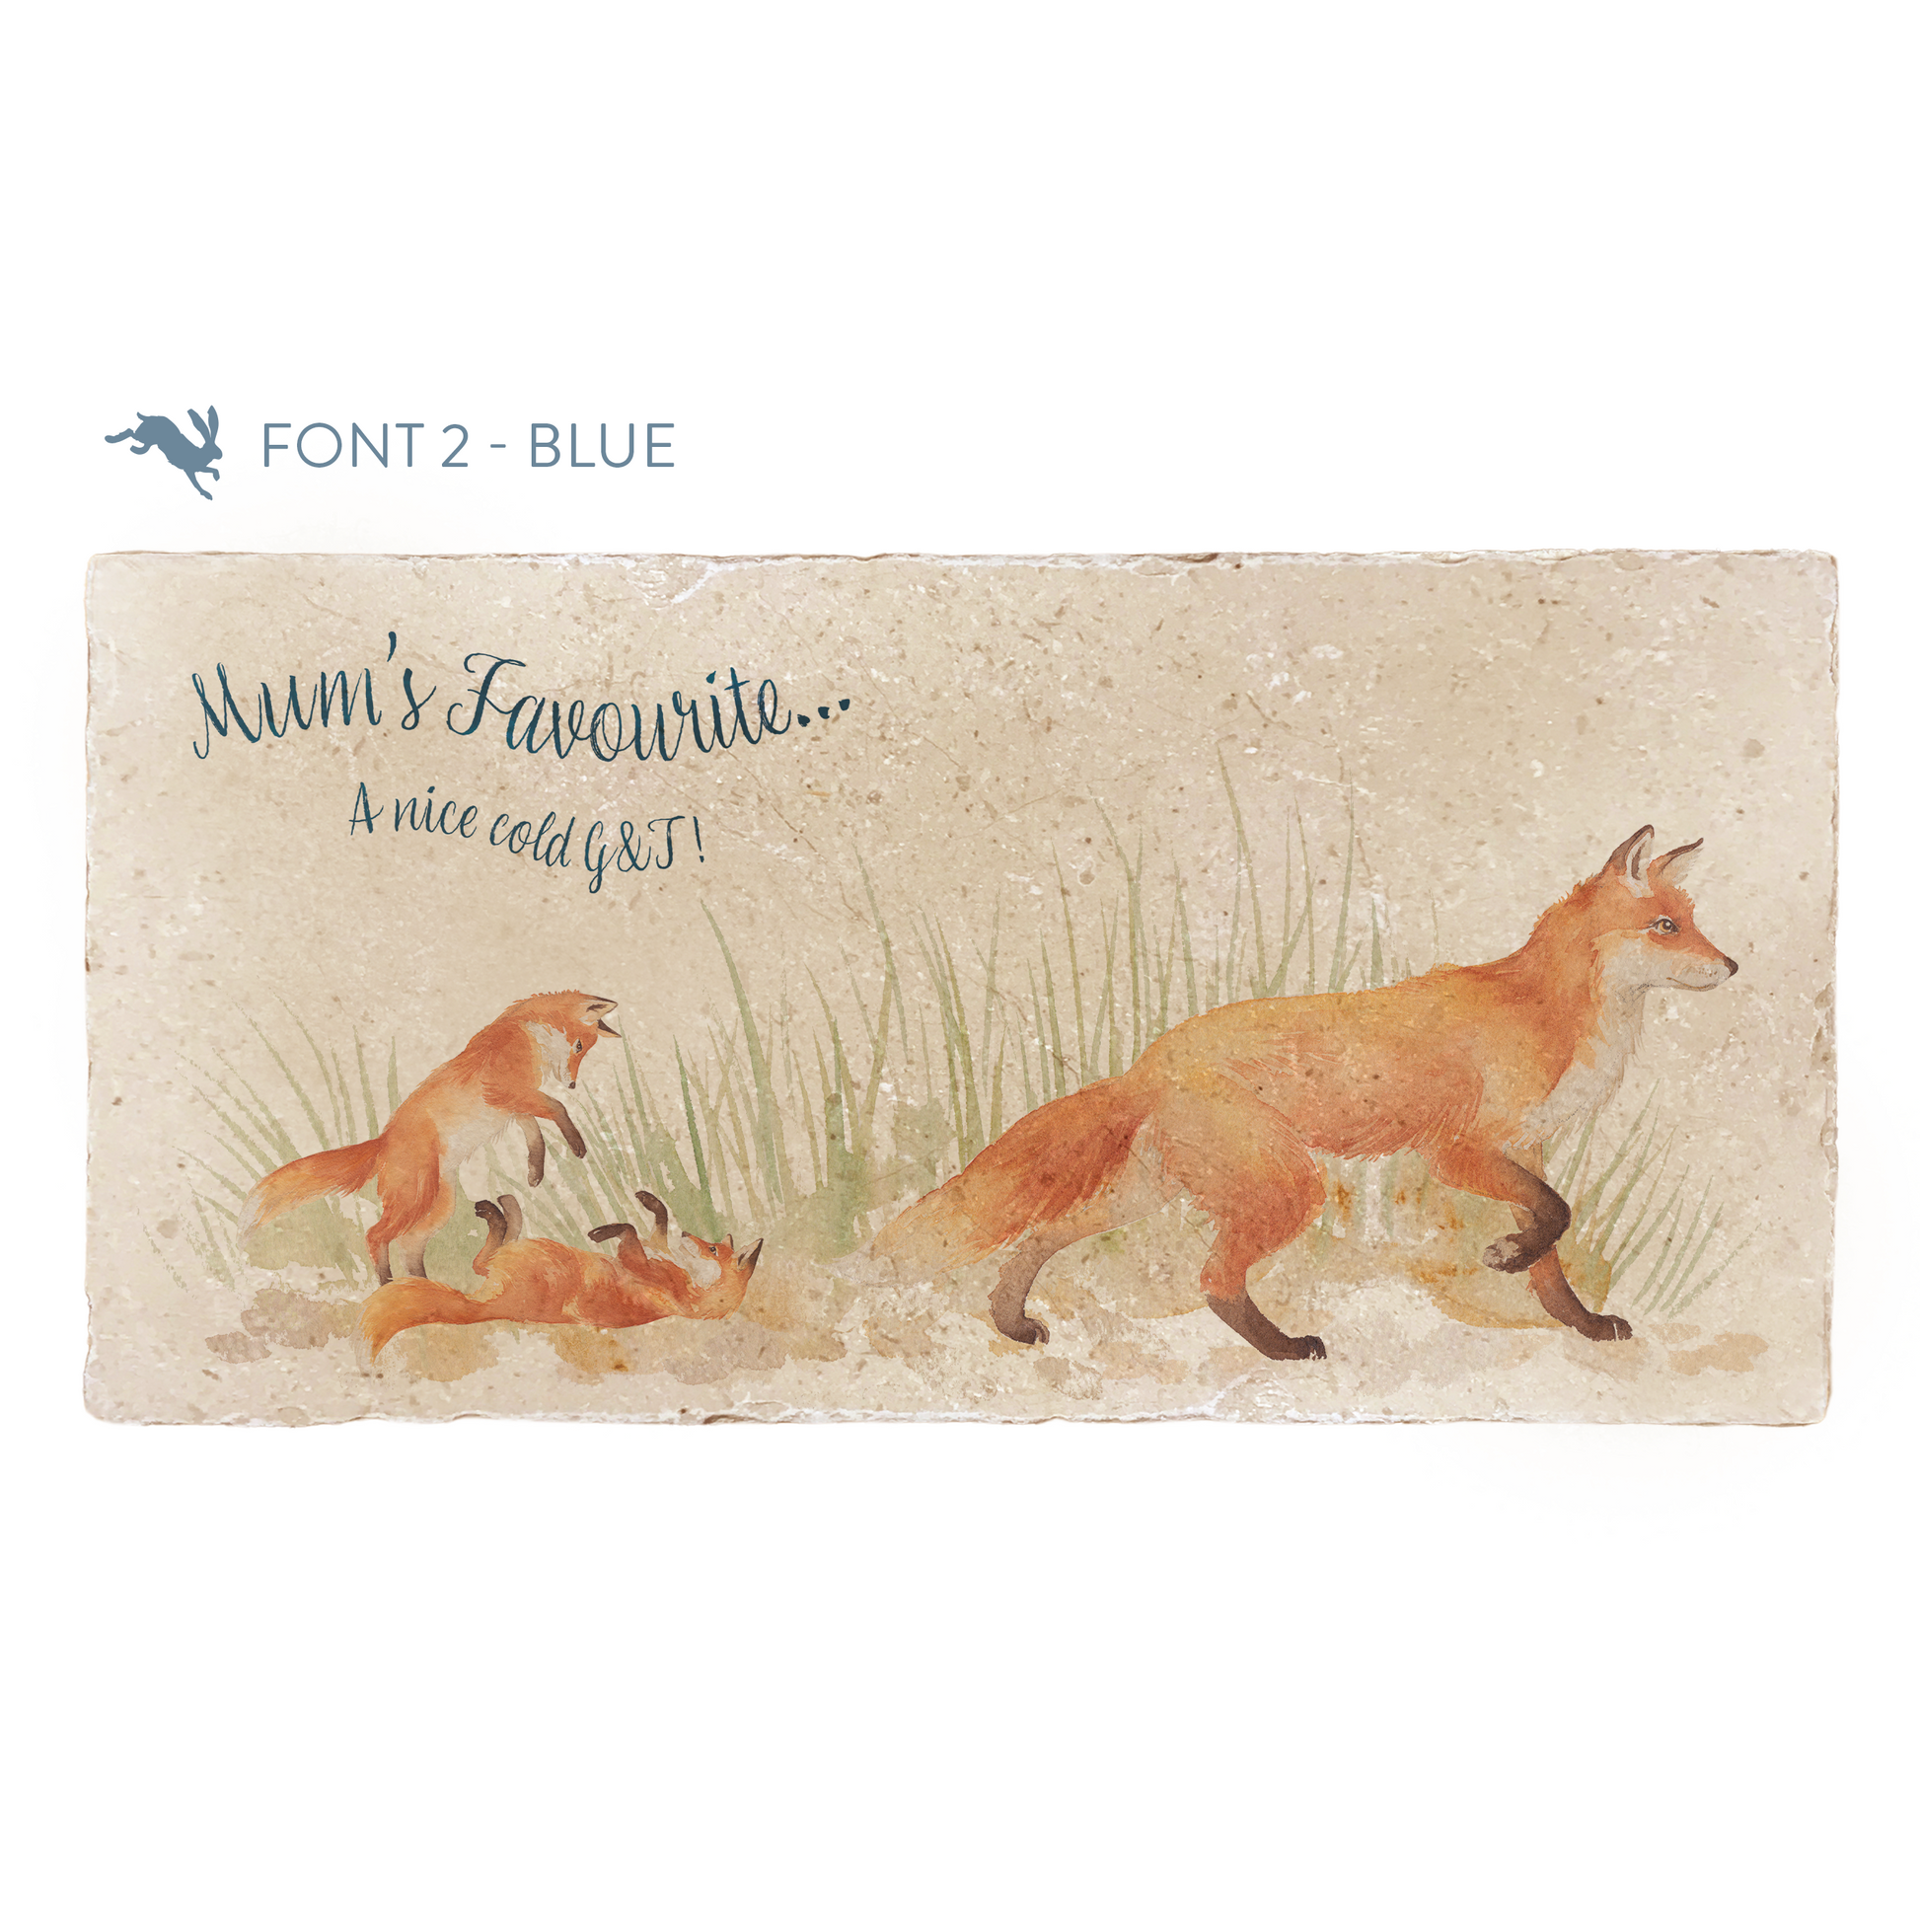 A personalised rectangular marble sharing platter featuring a fox design. The example personalised dark blue text reads 'Mum's Favourite... A nice cold G&T!' in an elegant script font.